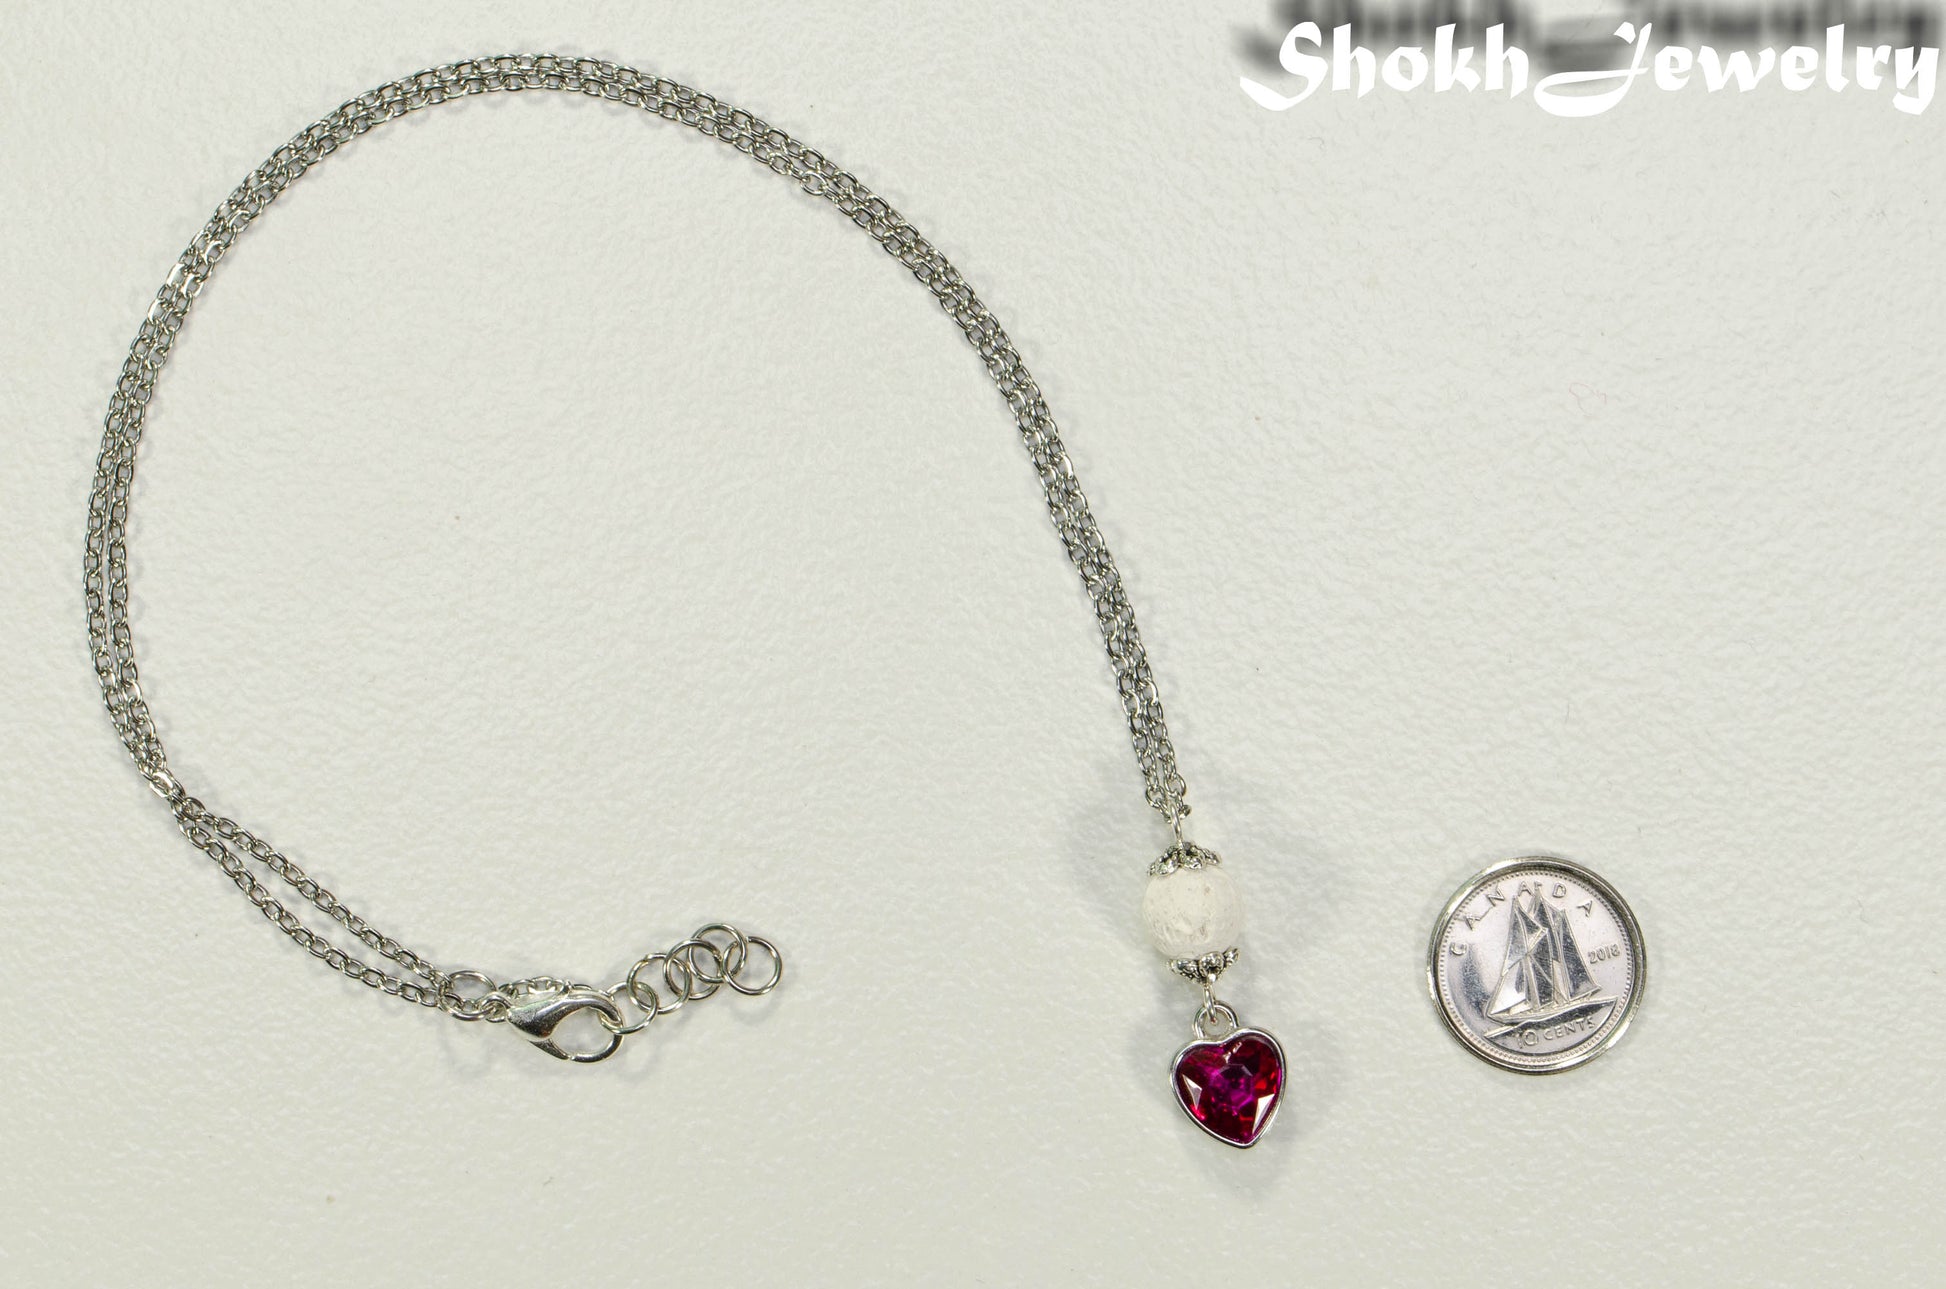 Lava Rock and Heart Shaped October Birthstone Choker Necklace beside a dime.